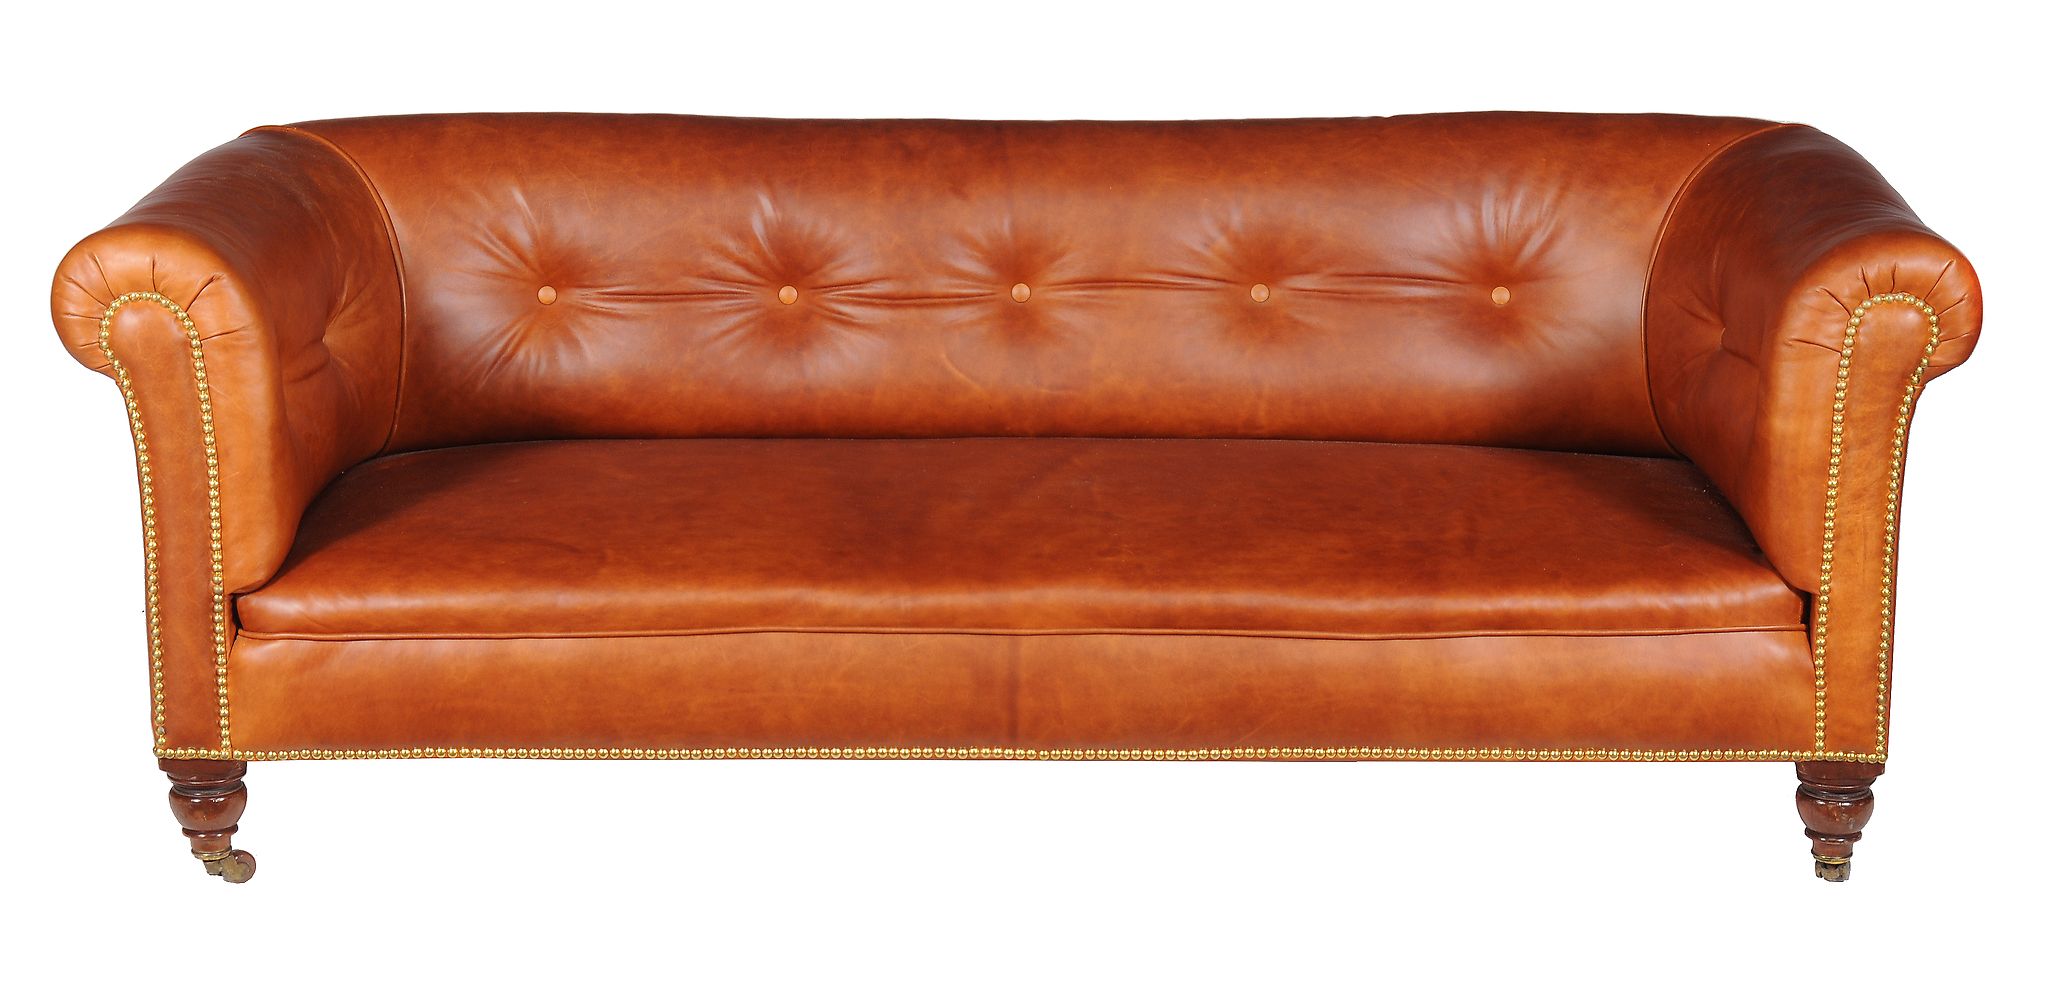 A Victorian walnut and buttoned leather upholstered sofa, by R GARNETT & SONS , circa 1860, with - Image 3 of 3